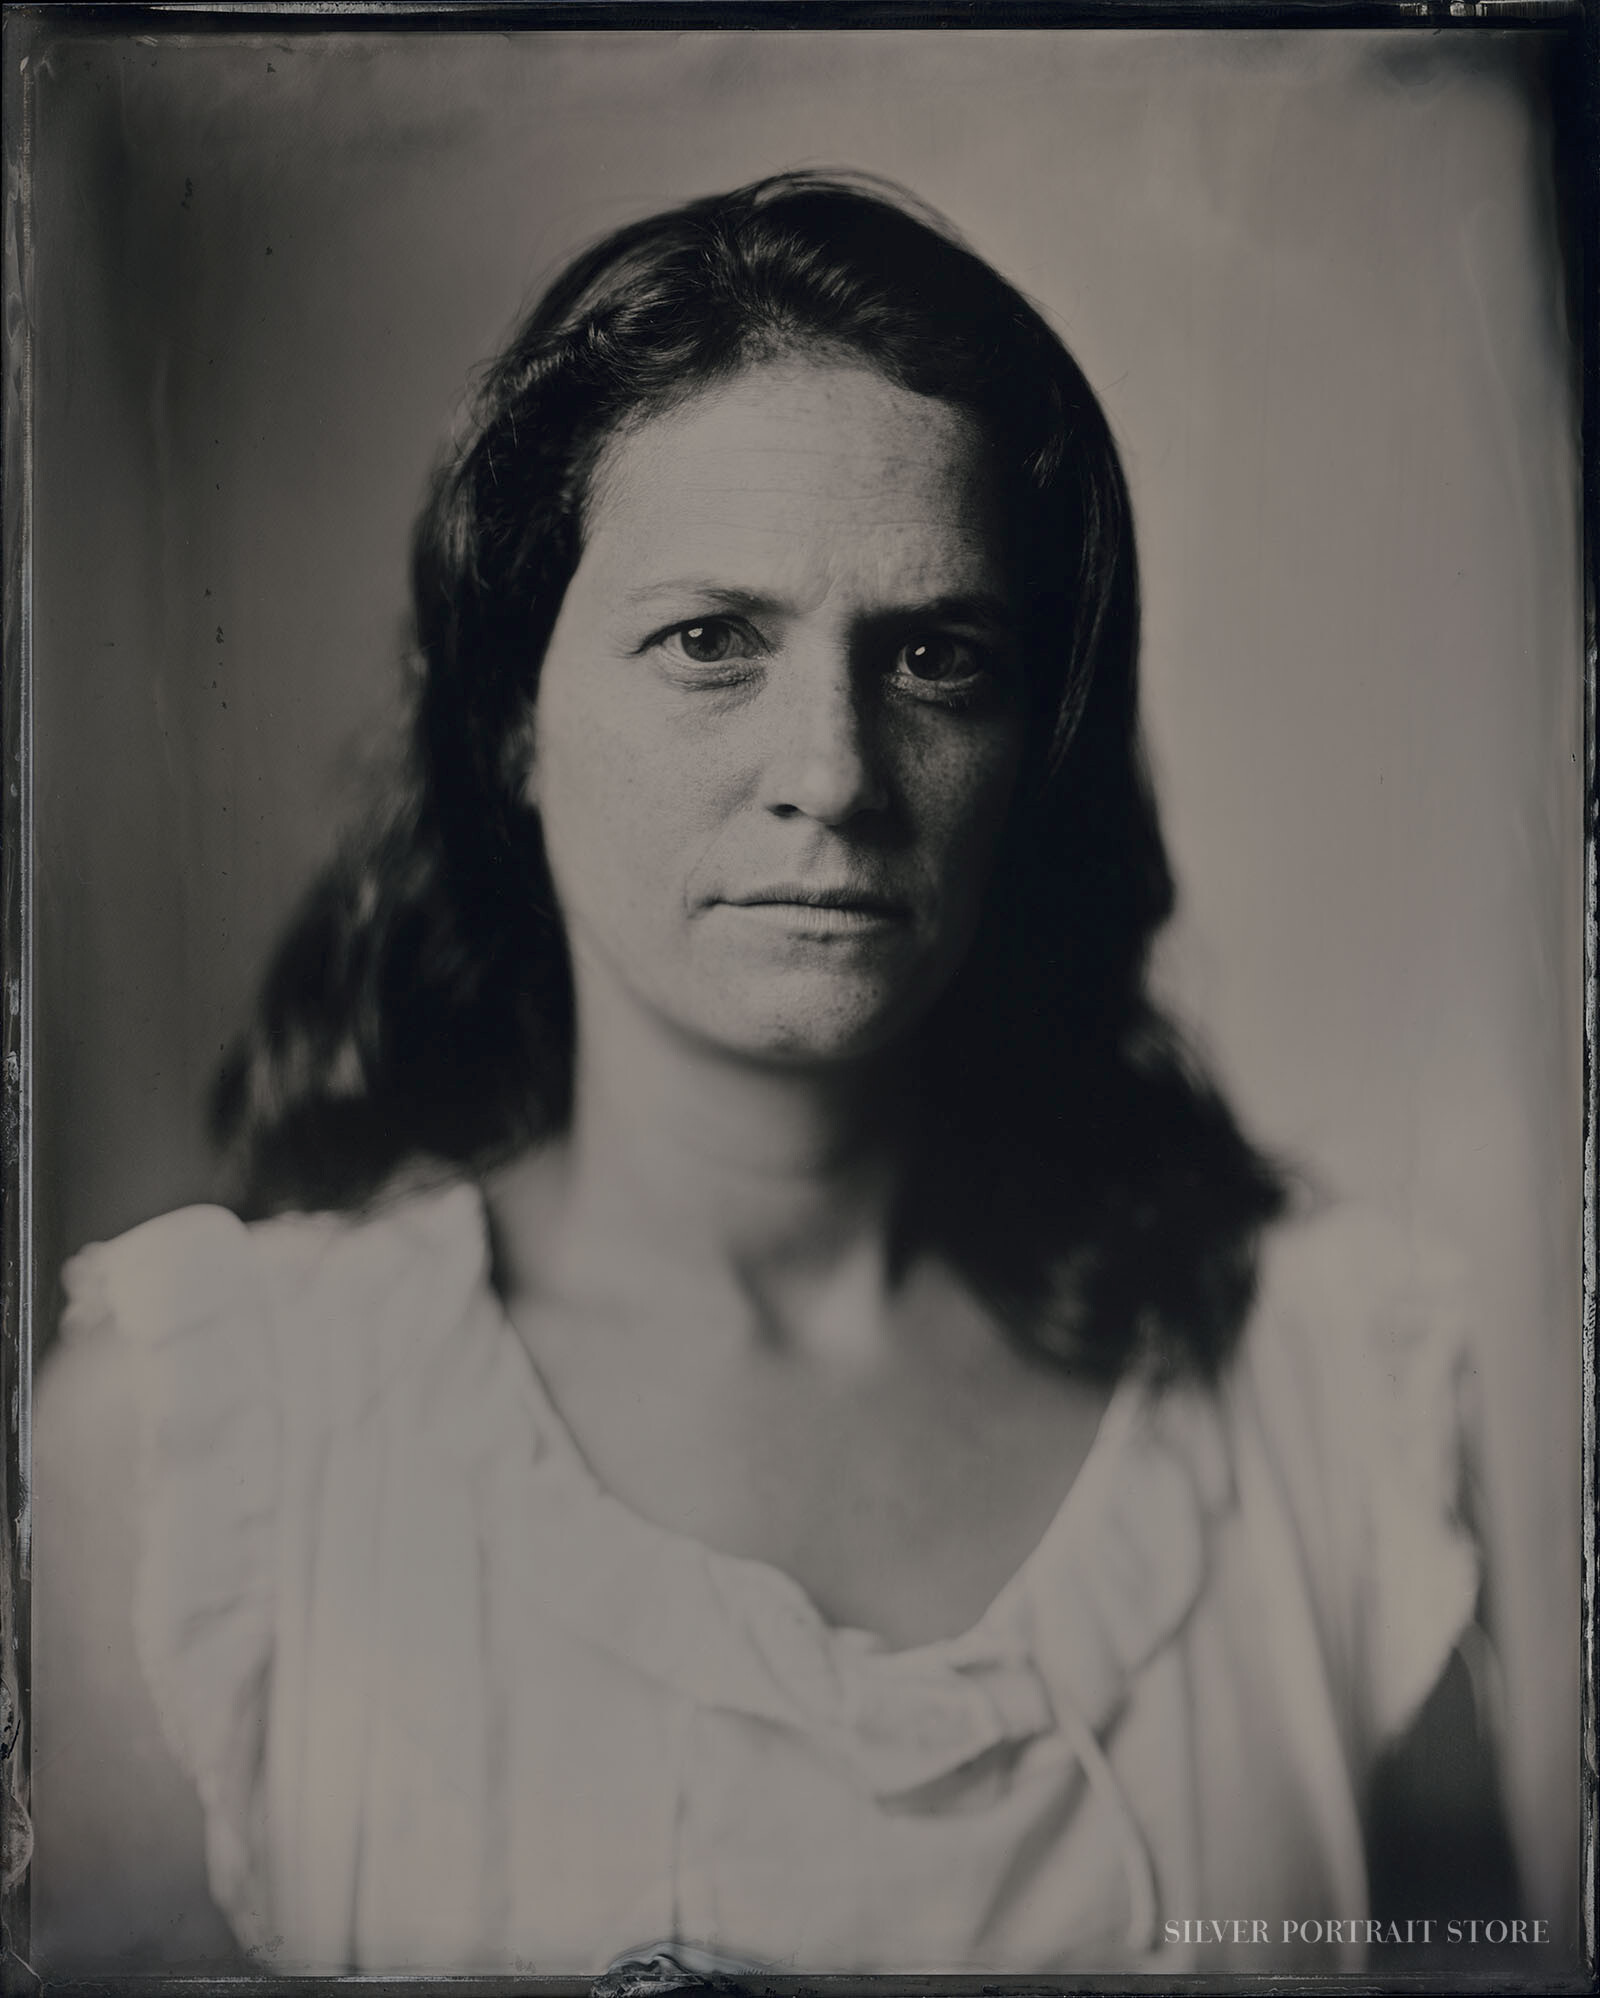 Eliza-Silver Portrait Store-Scan from Wet plate collodion-Tintype 20 x 25 cm.